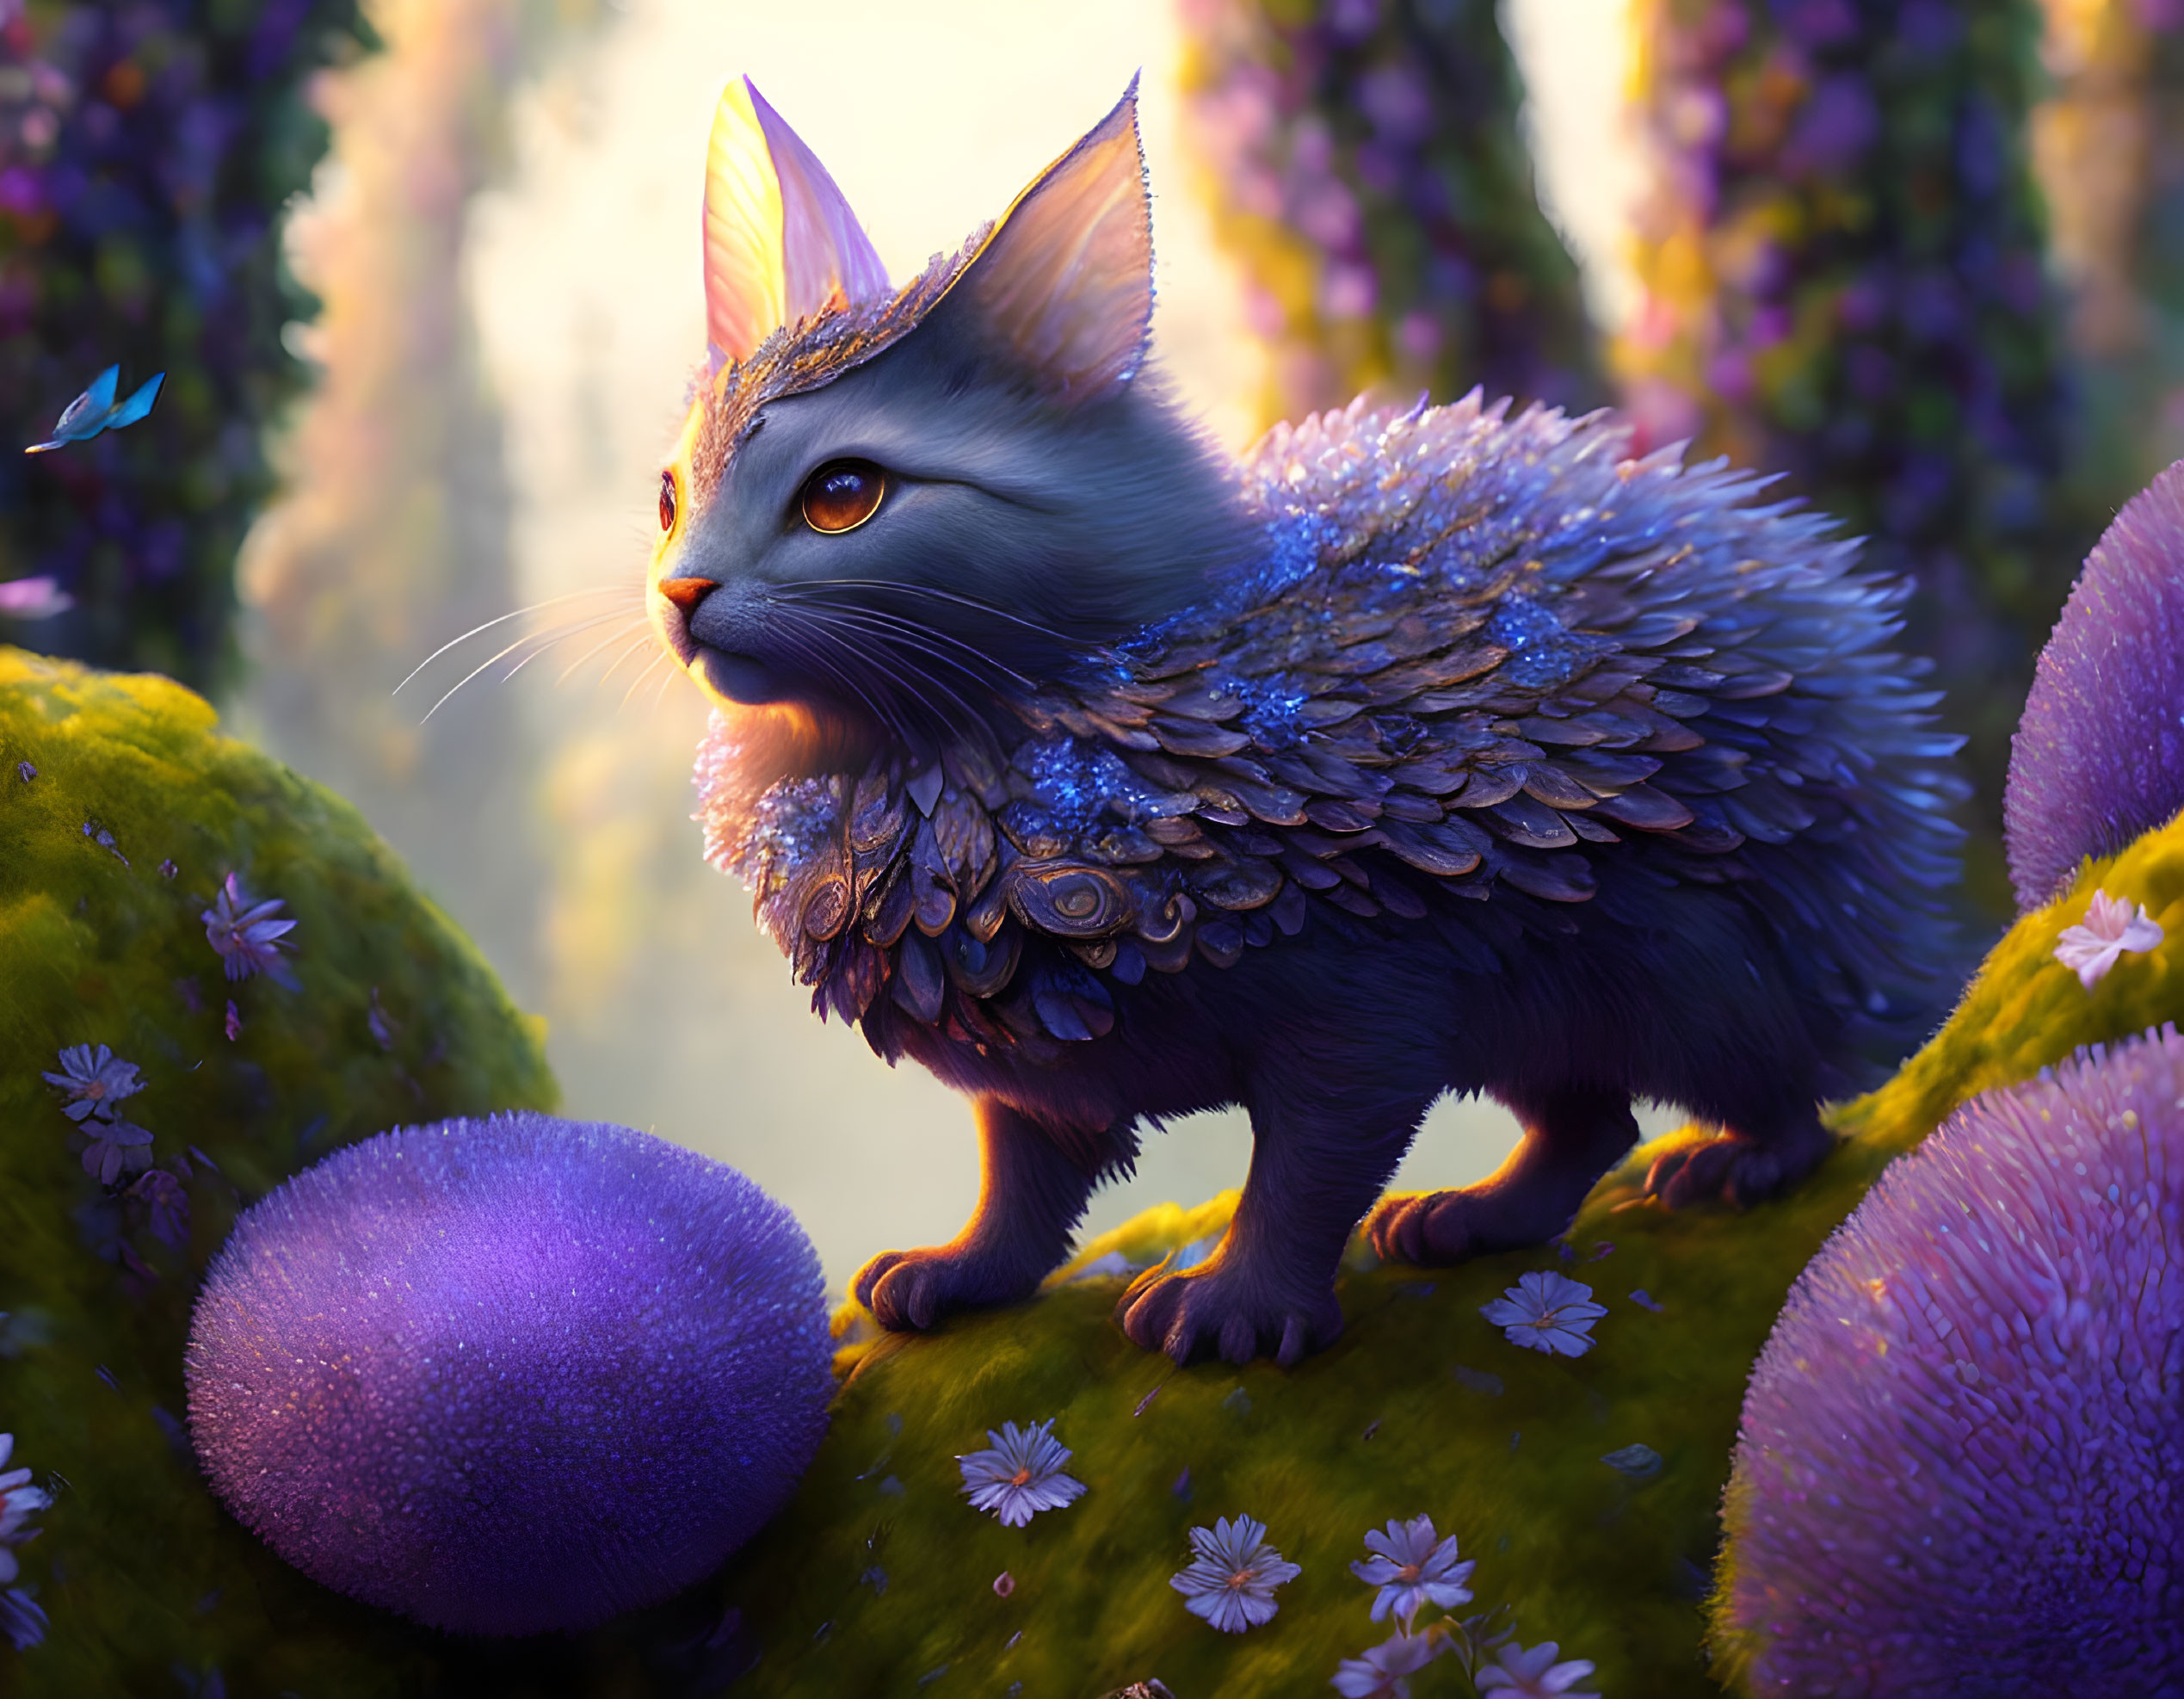 Fantastical cat with feather-like scales in enchanted forest among purple flora and butterflies